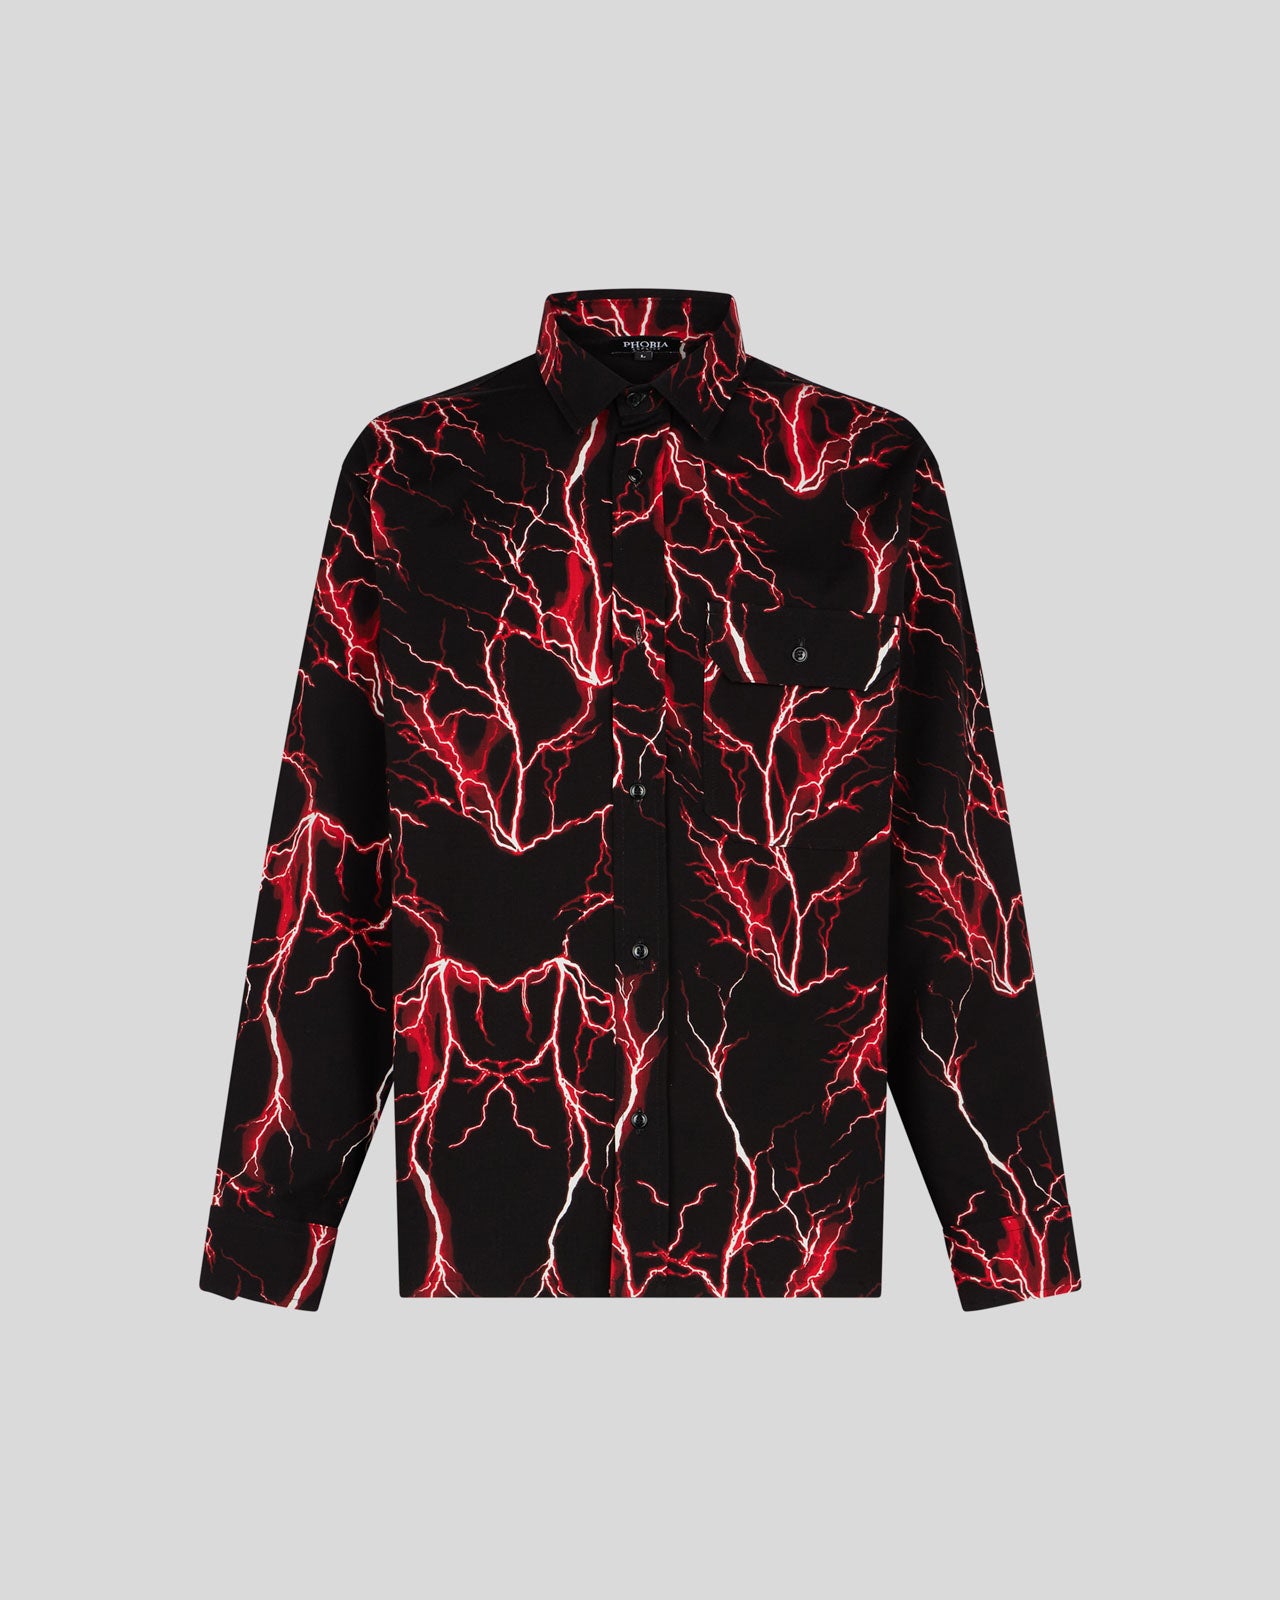 PHOBIA BLACK SHIRT WITH RED ALL OVER LIGHTNING